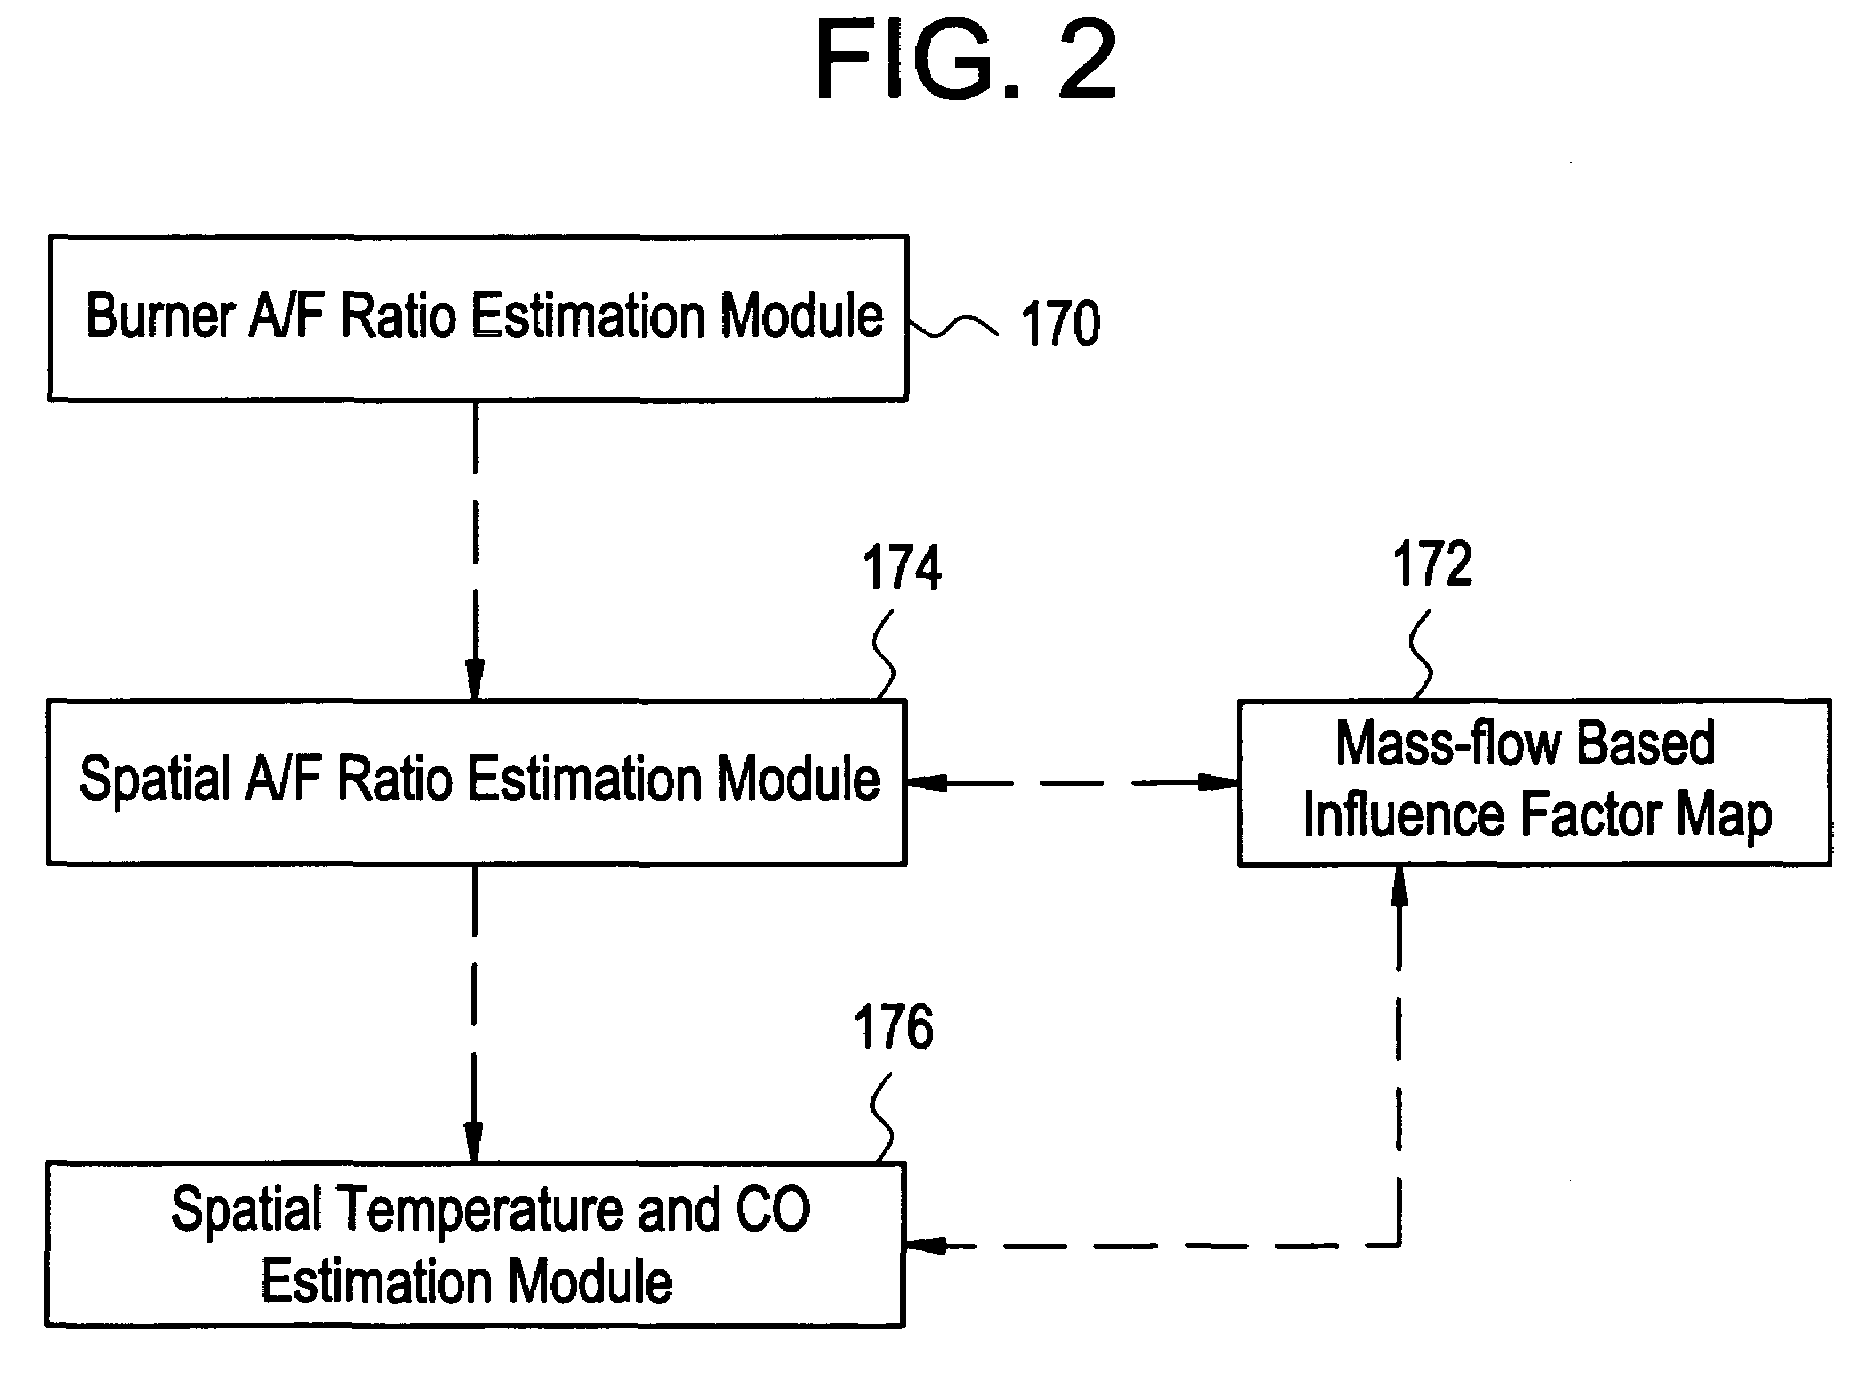 System, method, and article of manufacture for adjusting temperature levels at predetermined locations in a boiler system